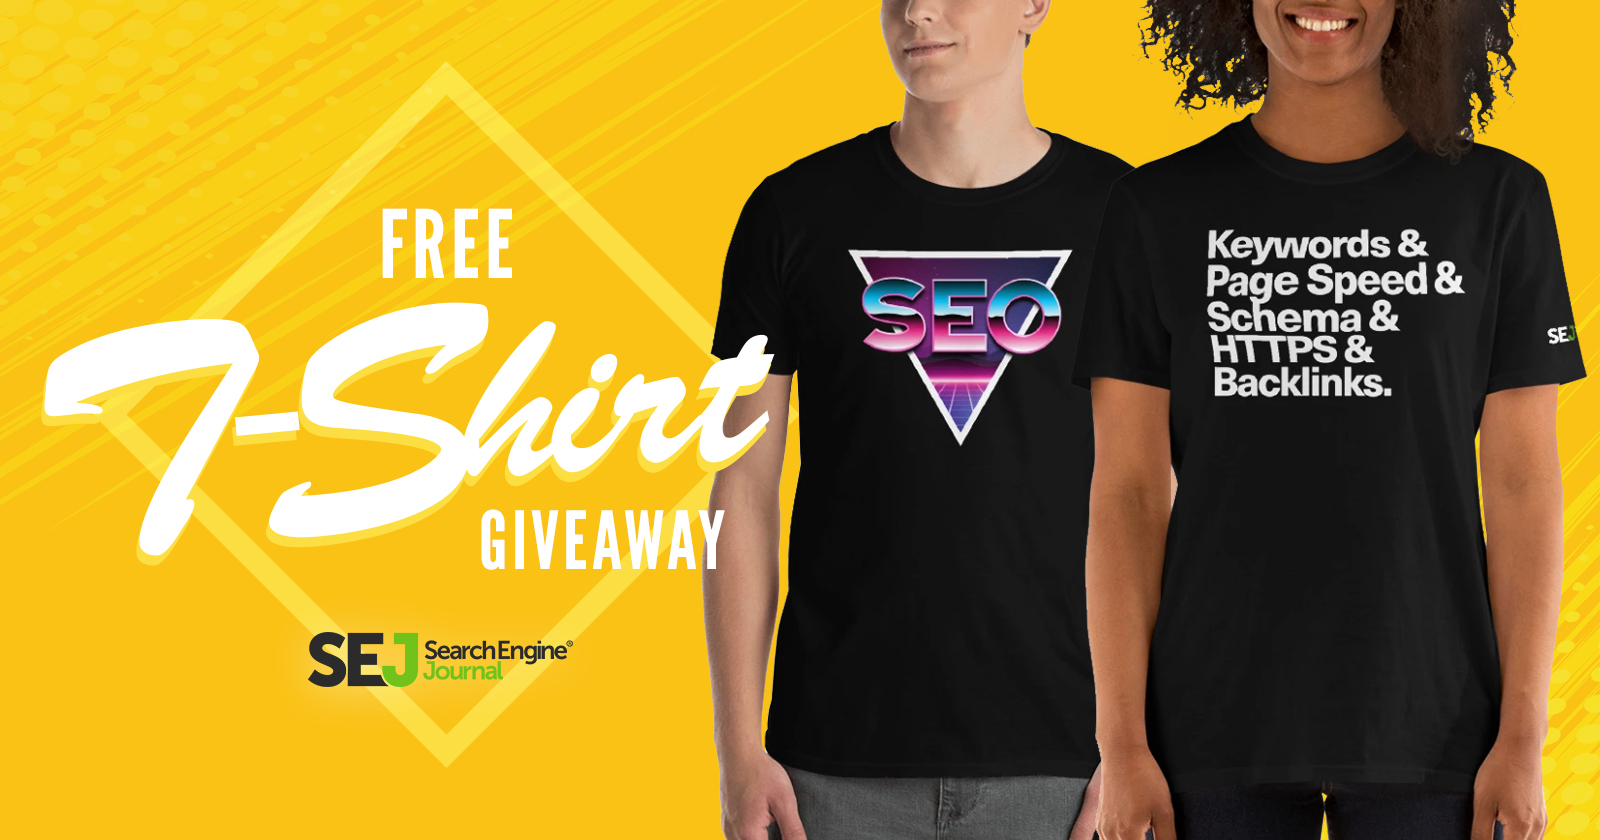 Search Engine Journal T-shirt Giveaway